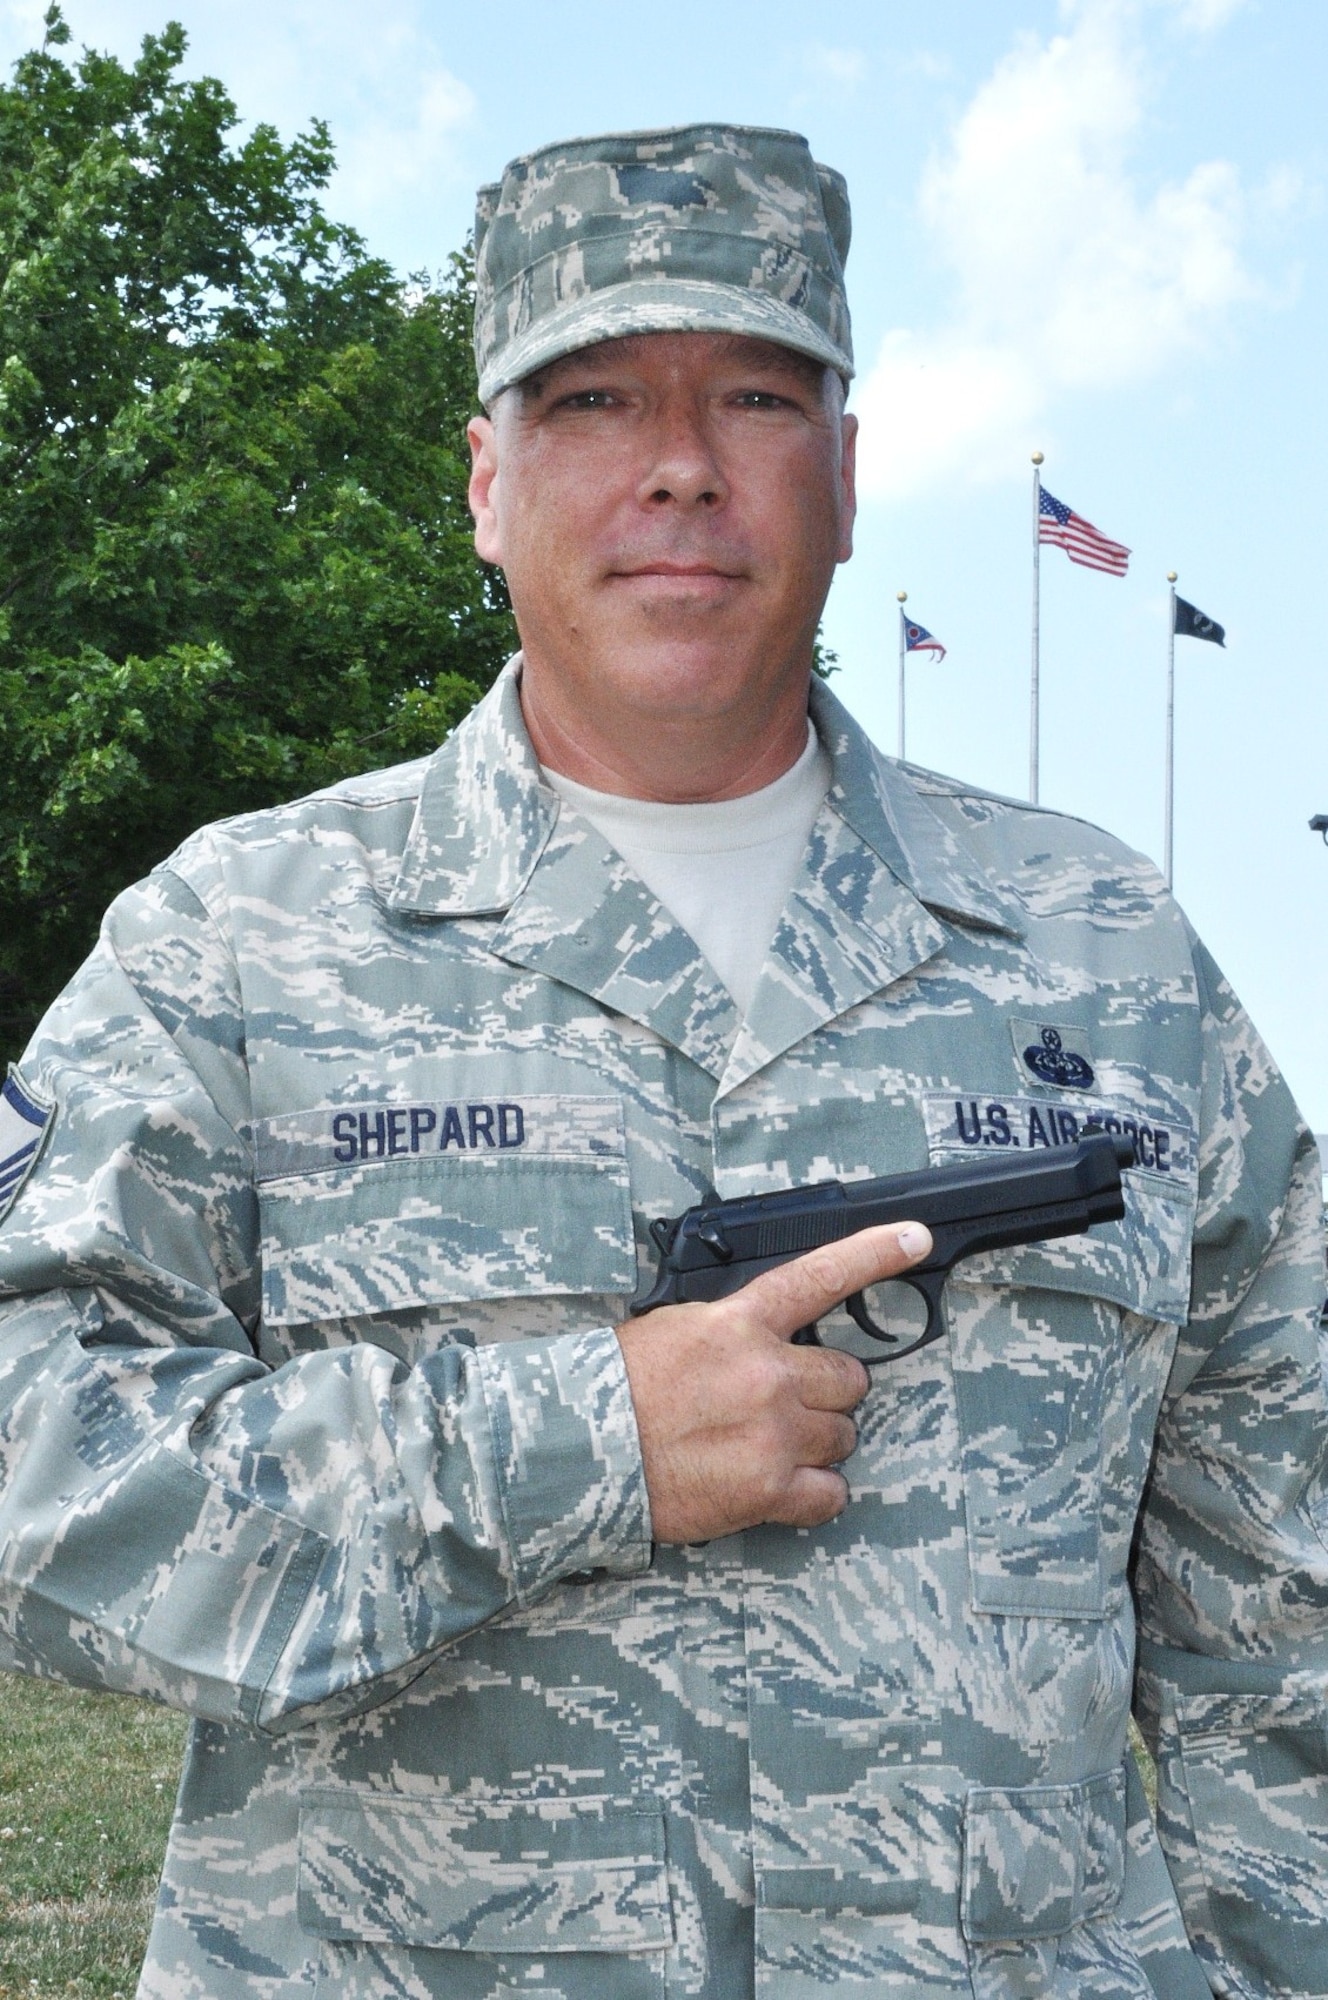 Master Sgt. Craig Shepard holds an M-9 pistol. Shepard, a member of the 127th Communications Squadron at Selfridge Air National Guard Base, Mich., won 2012 National Trophy Pistol Match held this summer at Camp Perry, Ohio. In his first shooting competition ever, Shepard placed first among 400 competitors. 